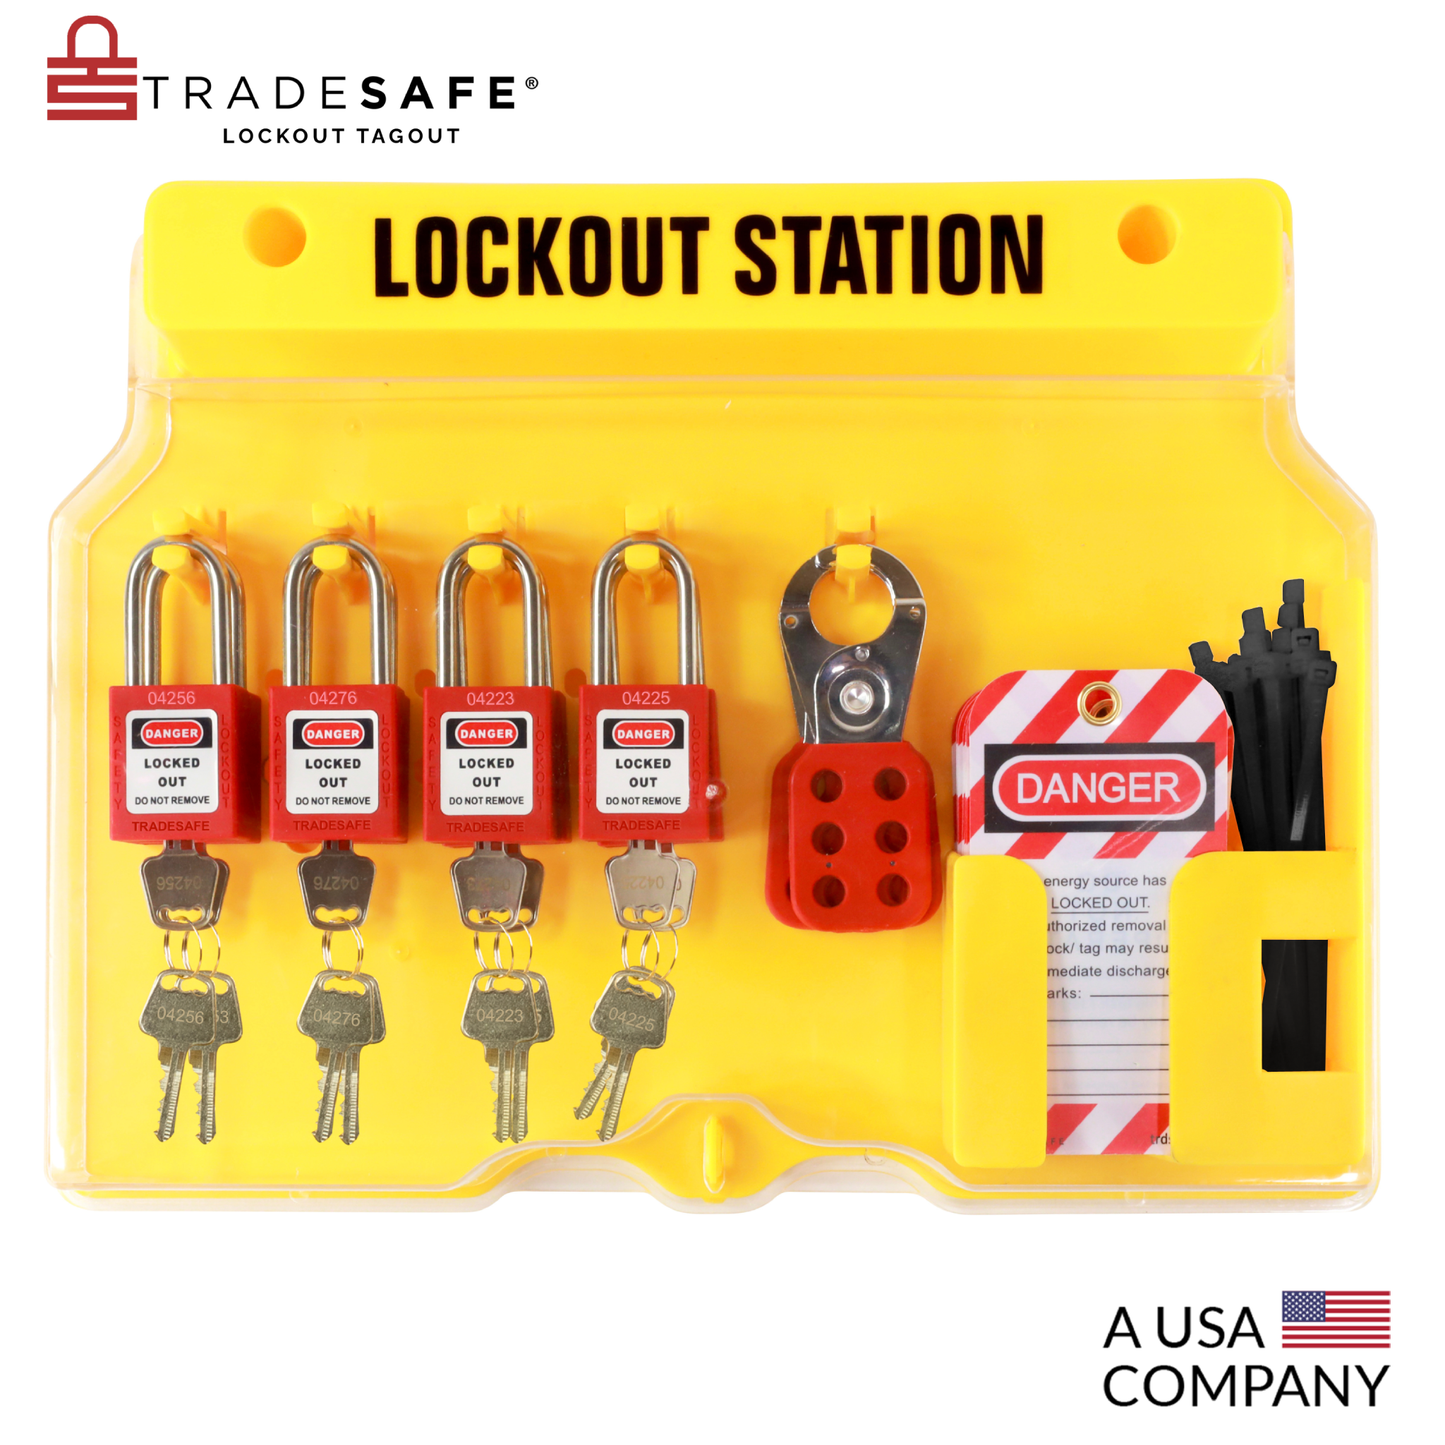 eye-level view of a yellow Lockout Tagout station with its transparent cover closed, stocked with tags, hasps, and padlocks with 2 keys each